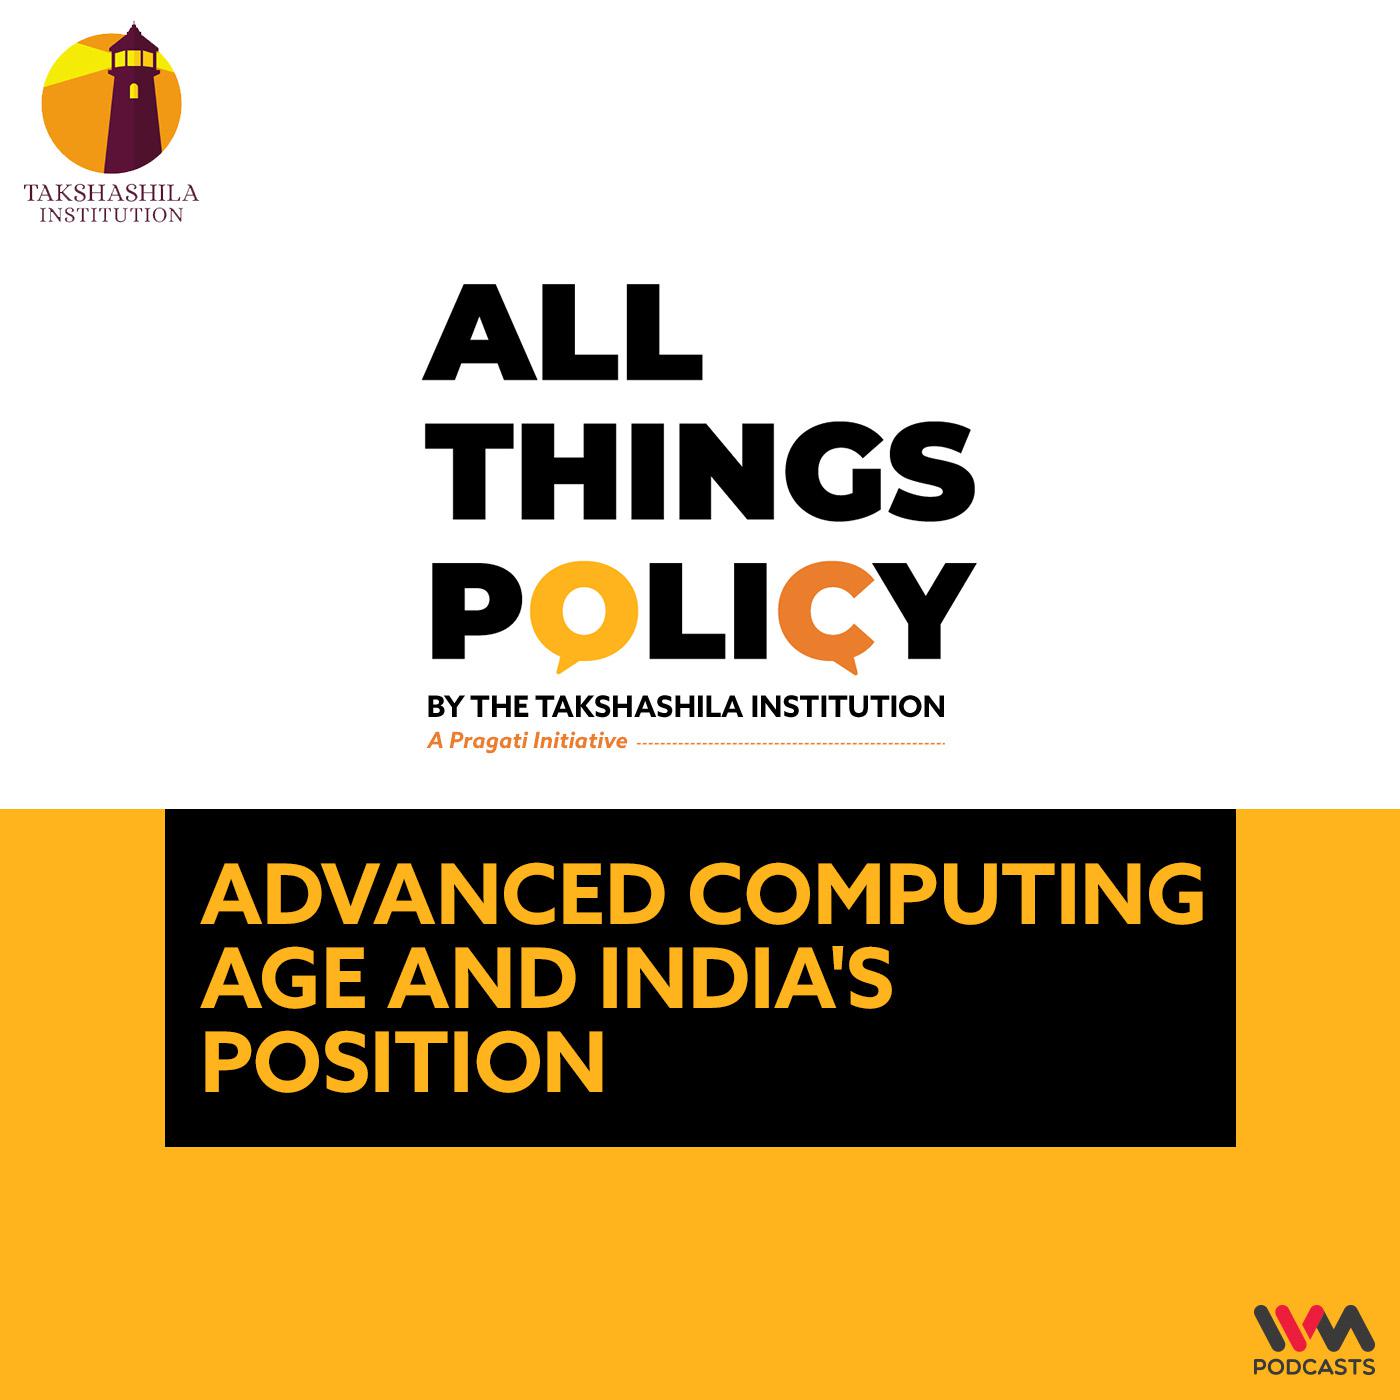 Advanced Computing Age and India's Position